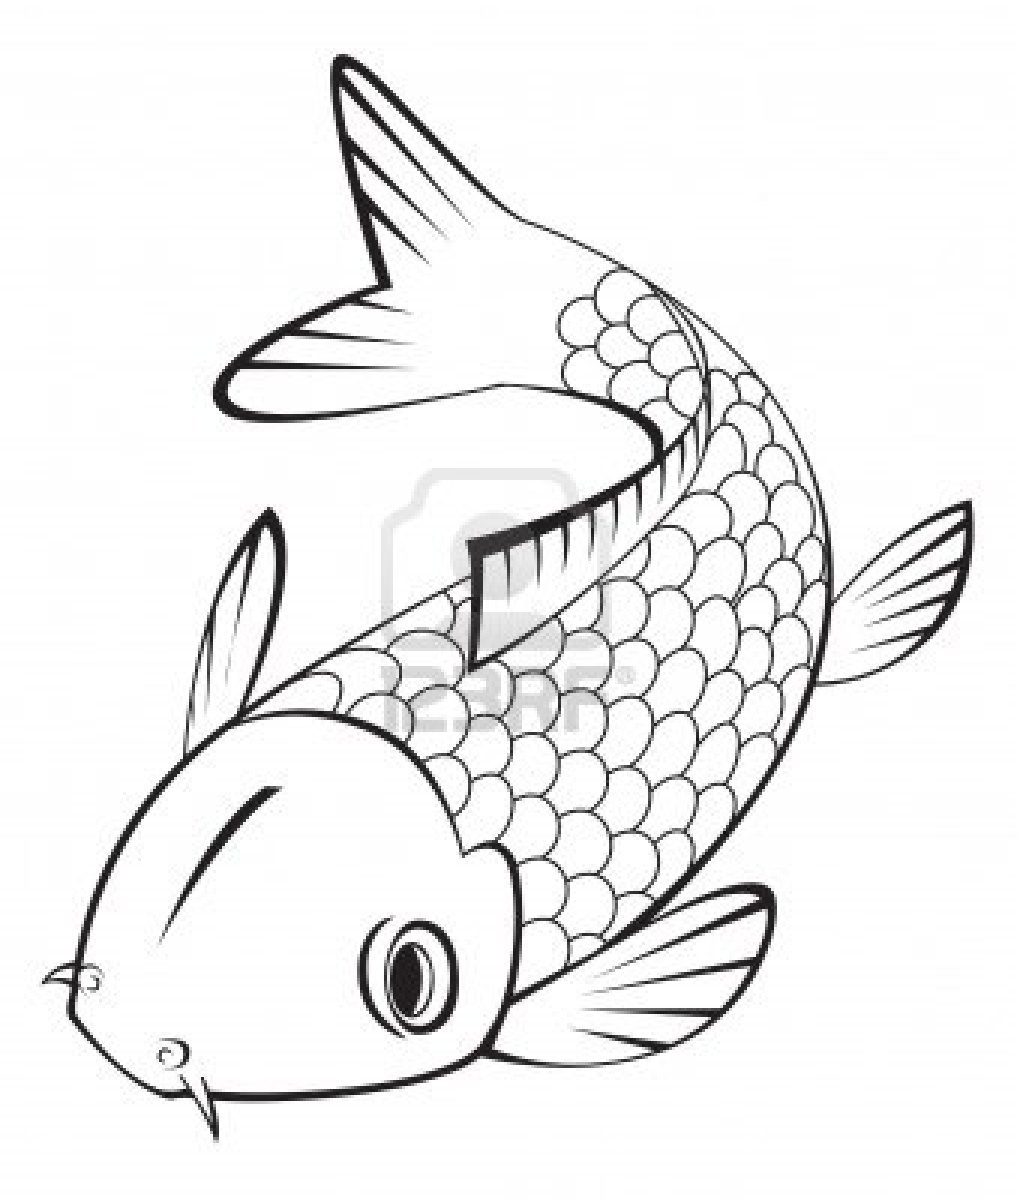 Fish Line Drawings - Cliparts.co